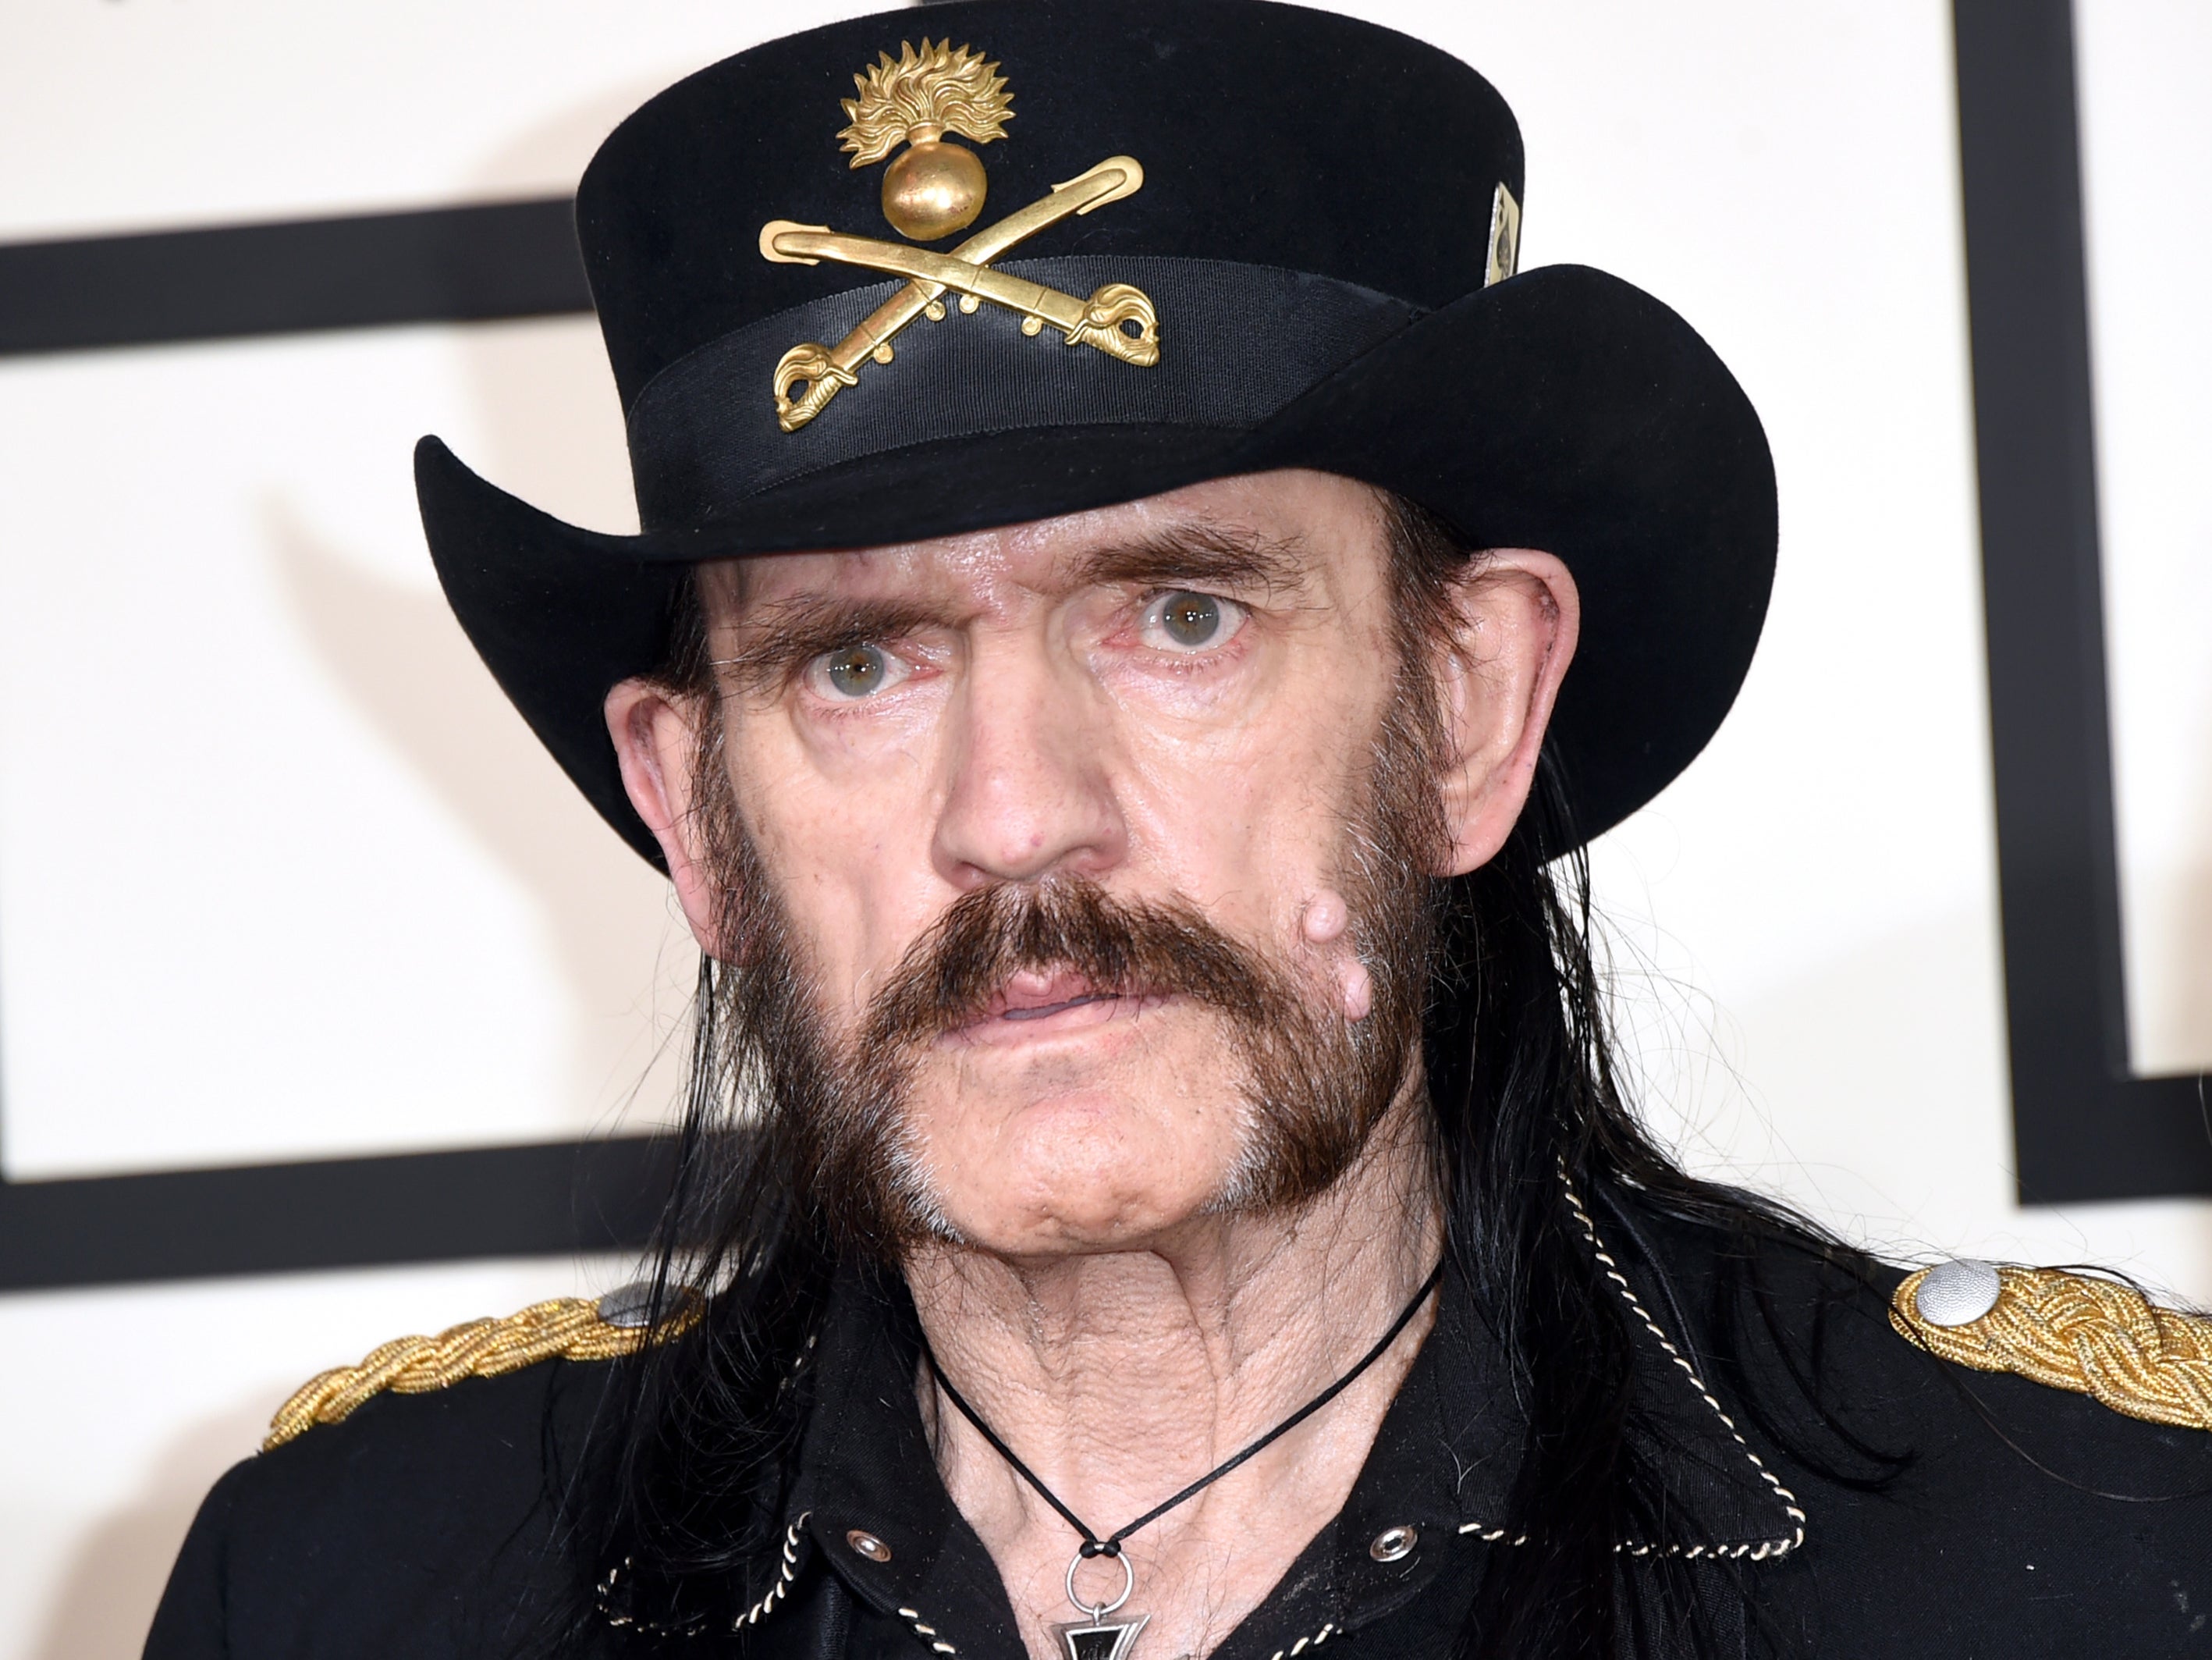 hawkwind’s dave brock says hard-living lemmy was ‘aghast’ at being kicked out of the band